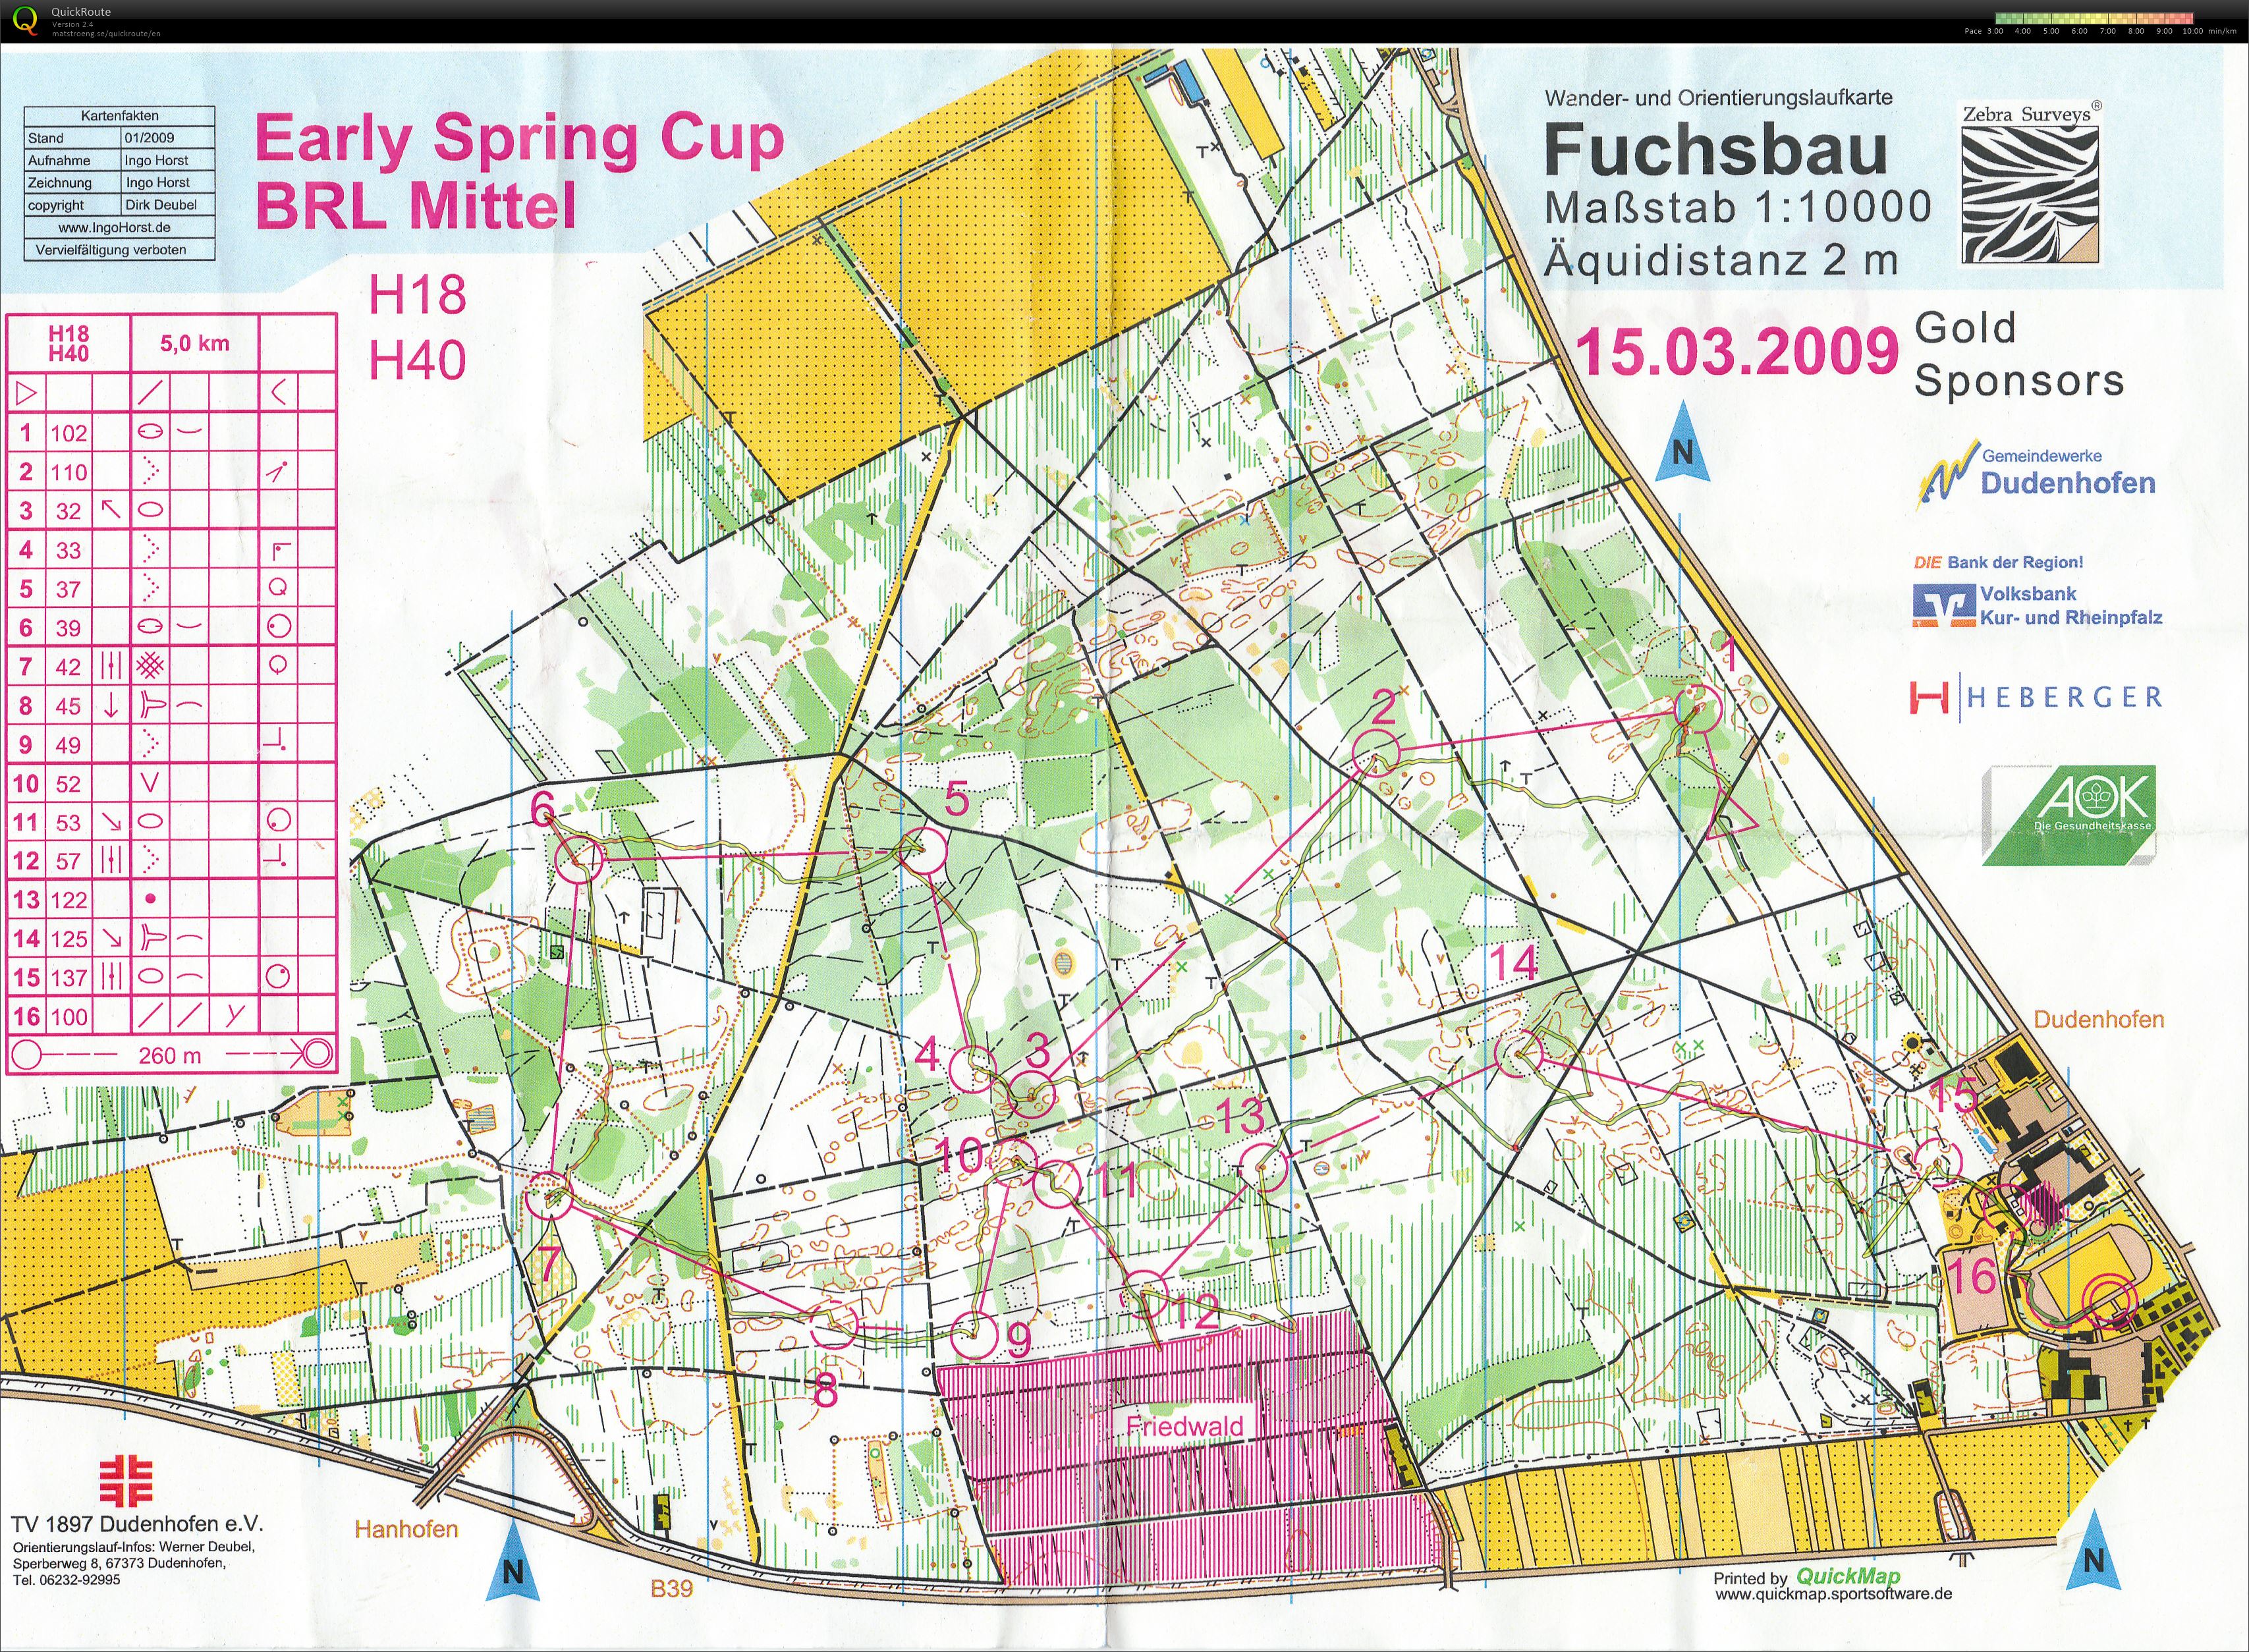 Early Spring-Cup Middle (15.03.2009)